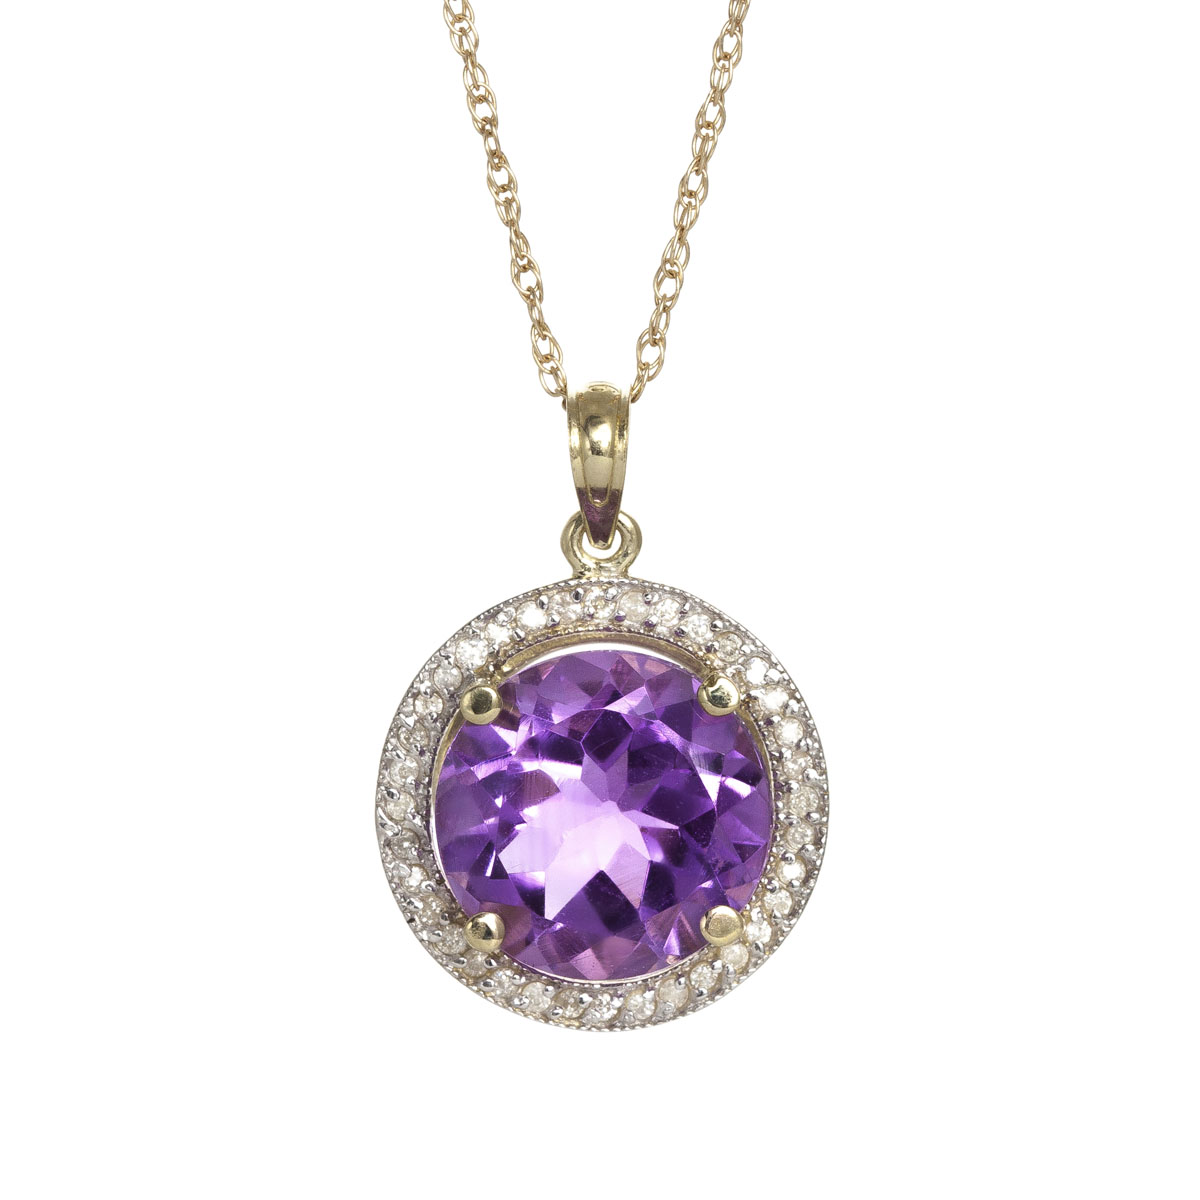 Amethyst Halo Pendant Necklace 6.2 ctw in 9ct Gold